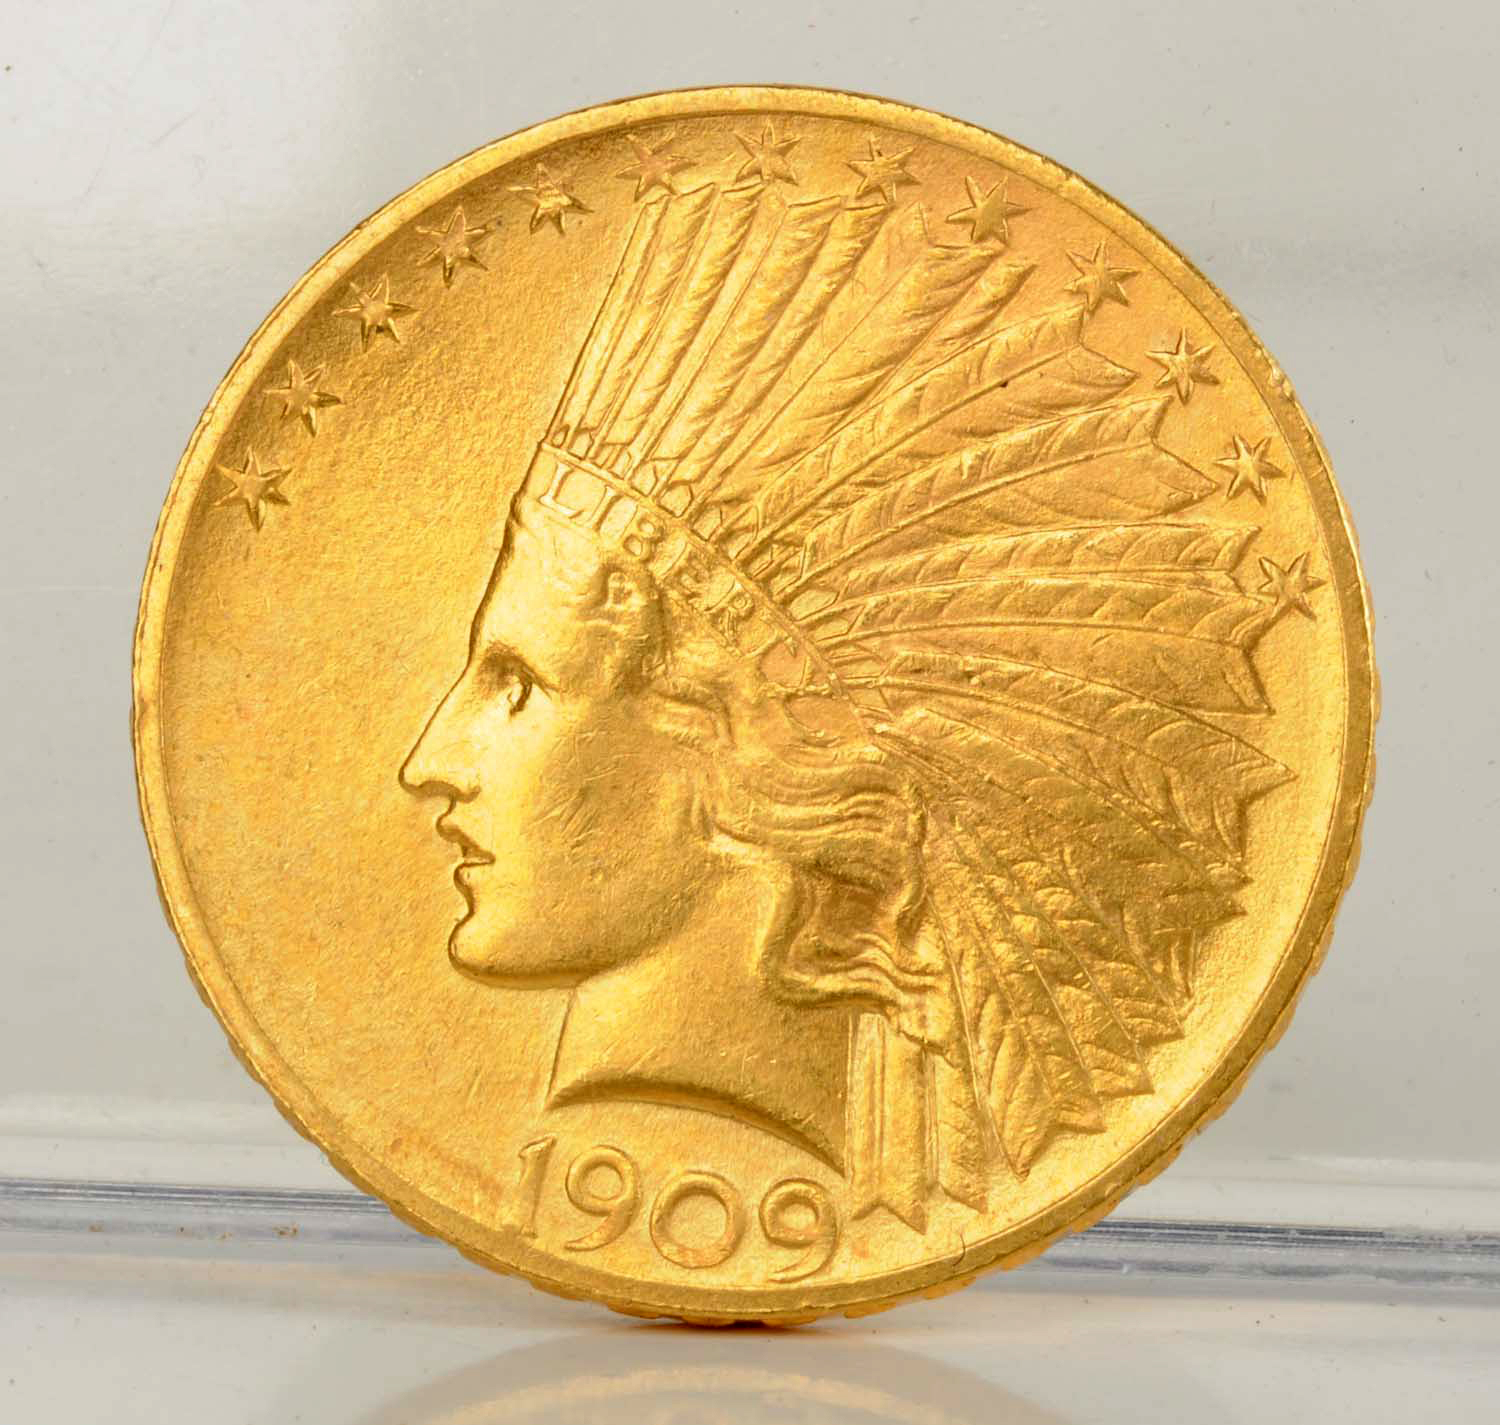 1909 $10 Gold Indian Coin, Estimated at $700-800.